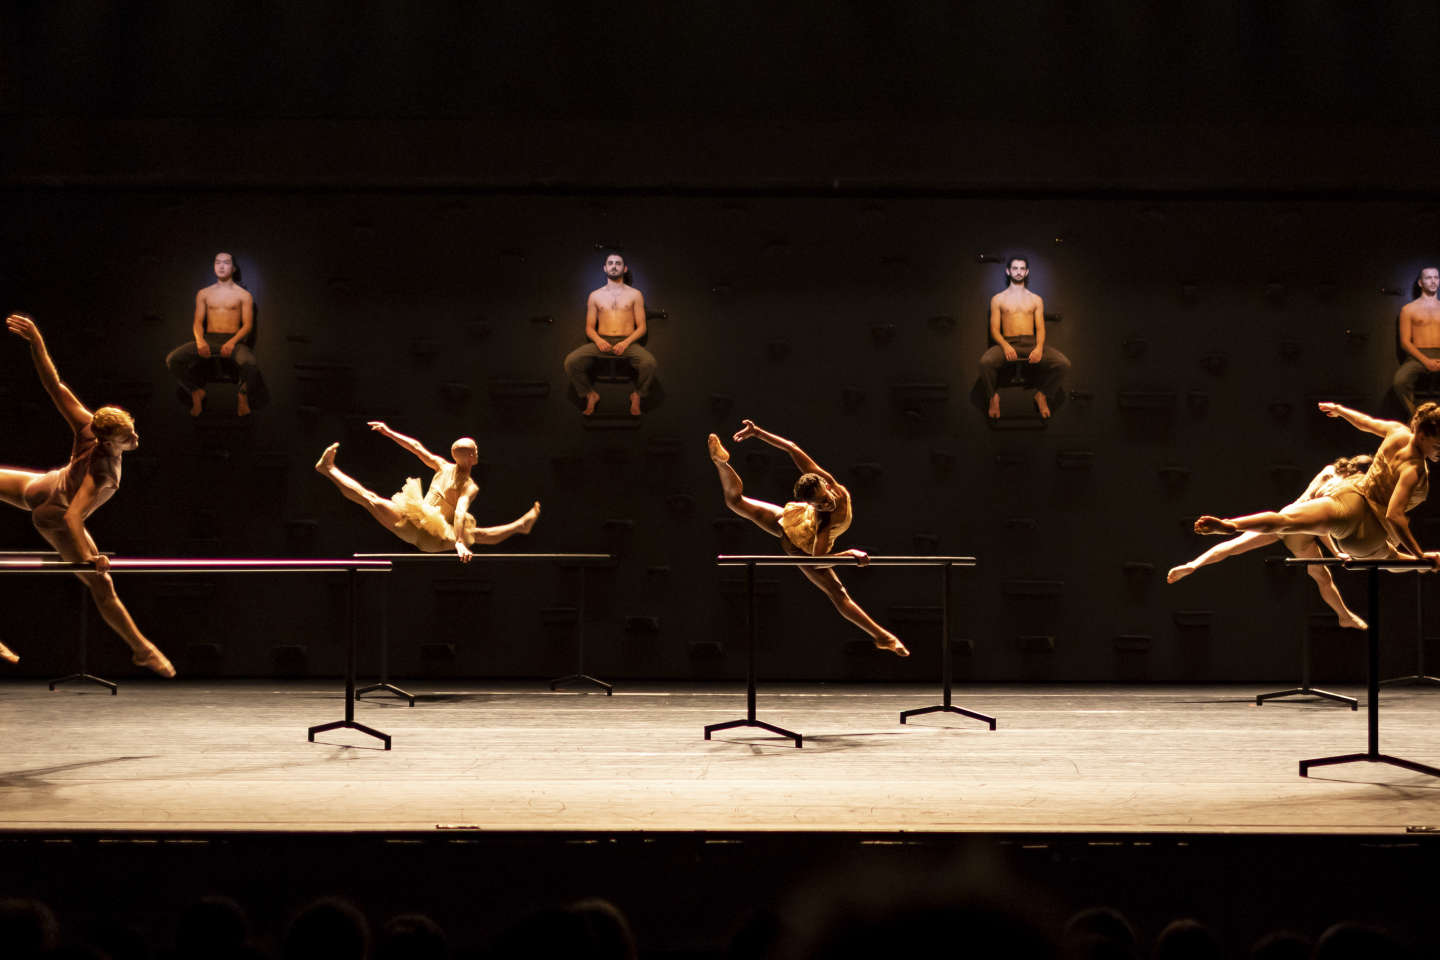 With “Momo”, Ohad Naharin works on the notion of separation in the body